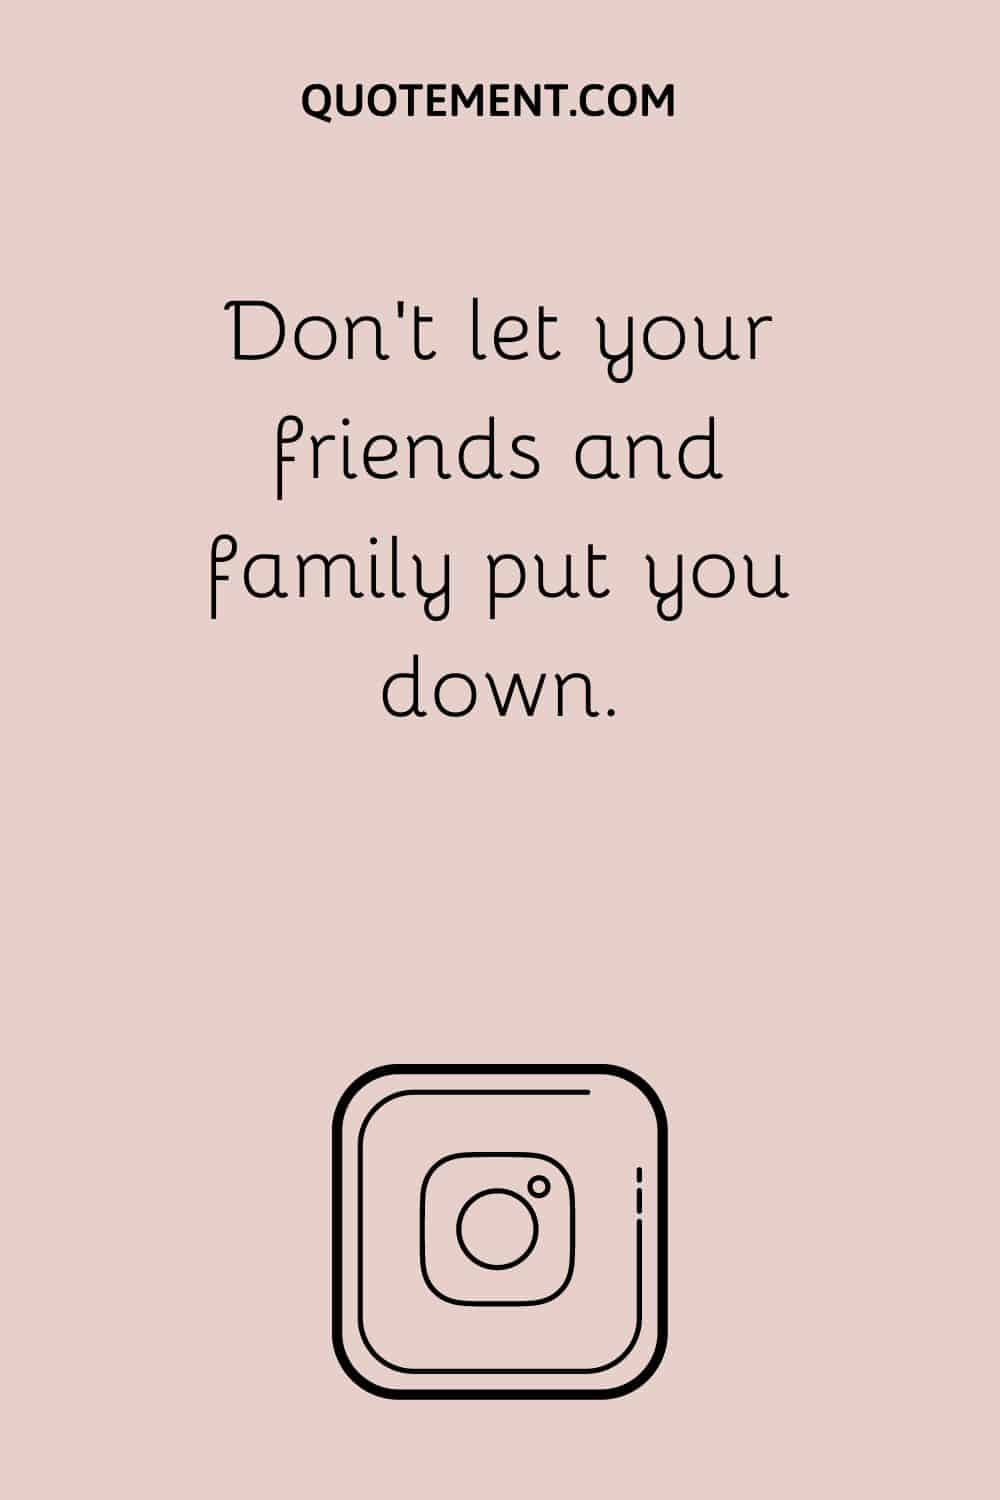 Don’t let your friends and family put you down